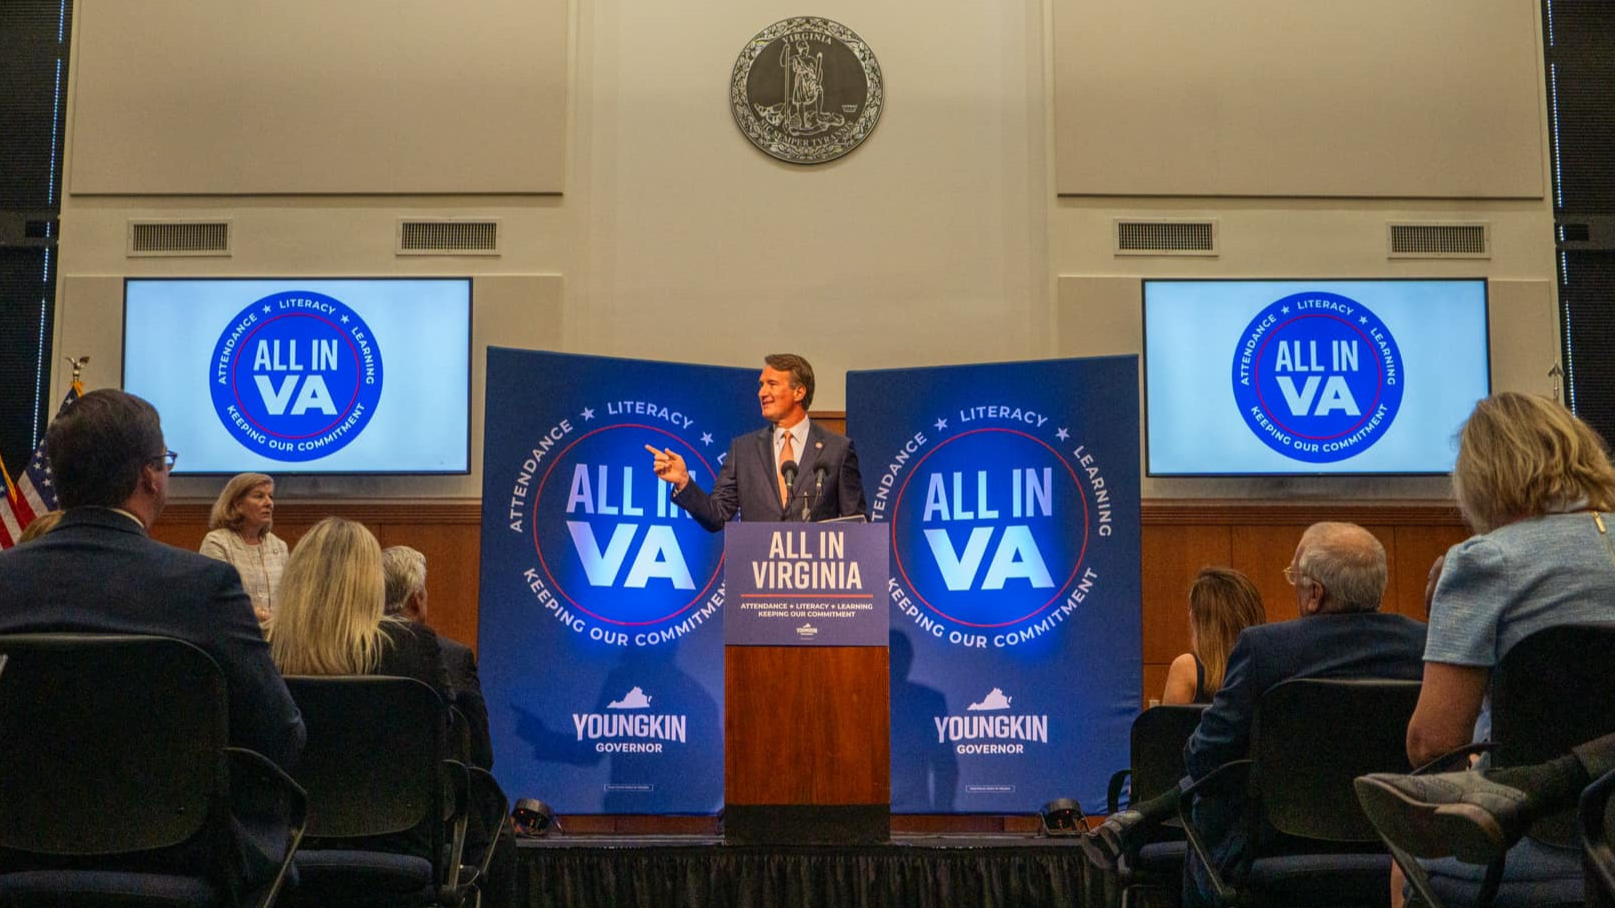 Youngkin Announces ‘ALL IN VA’ Plan to Address COVID-19 Era Learning Loss